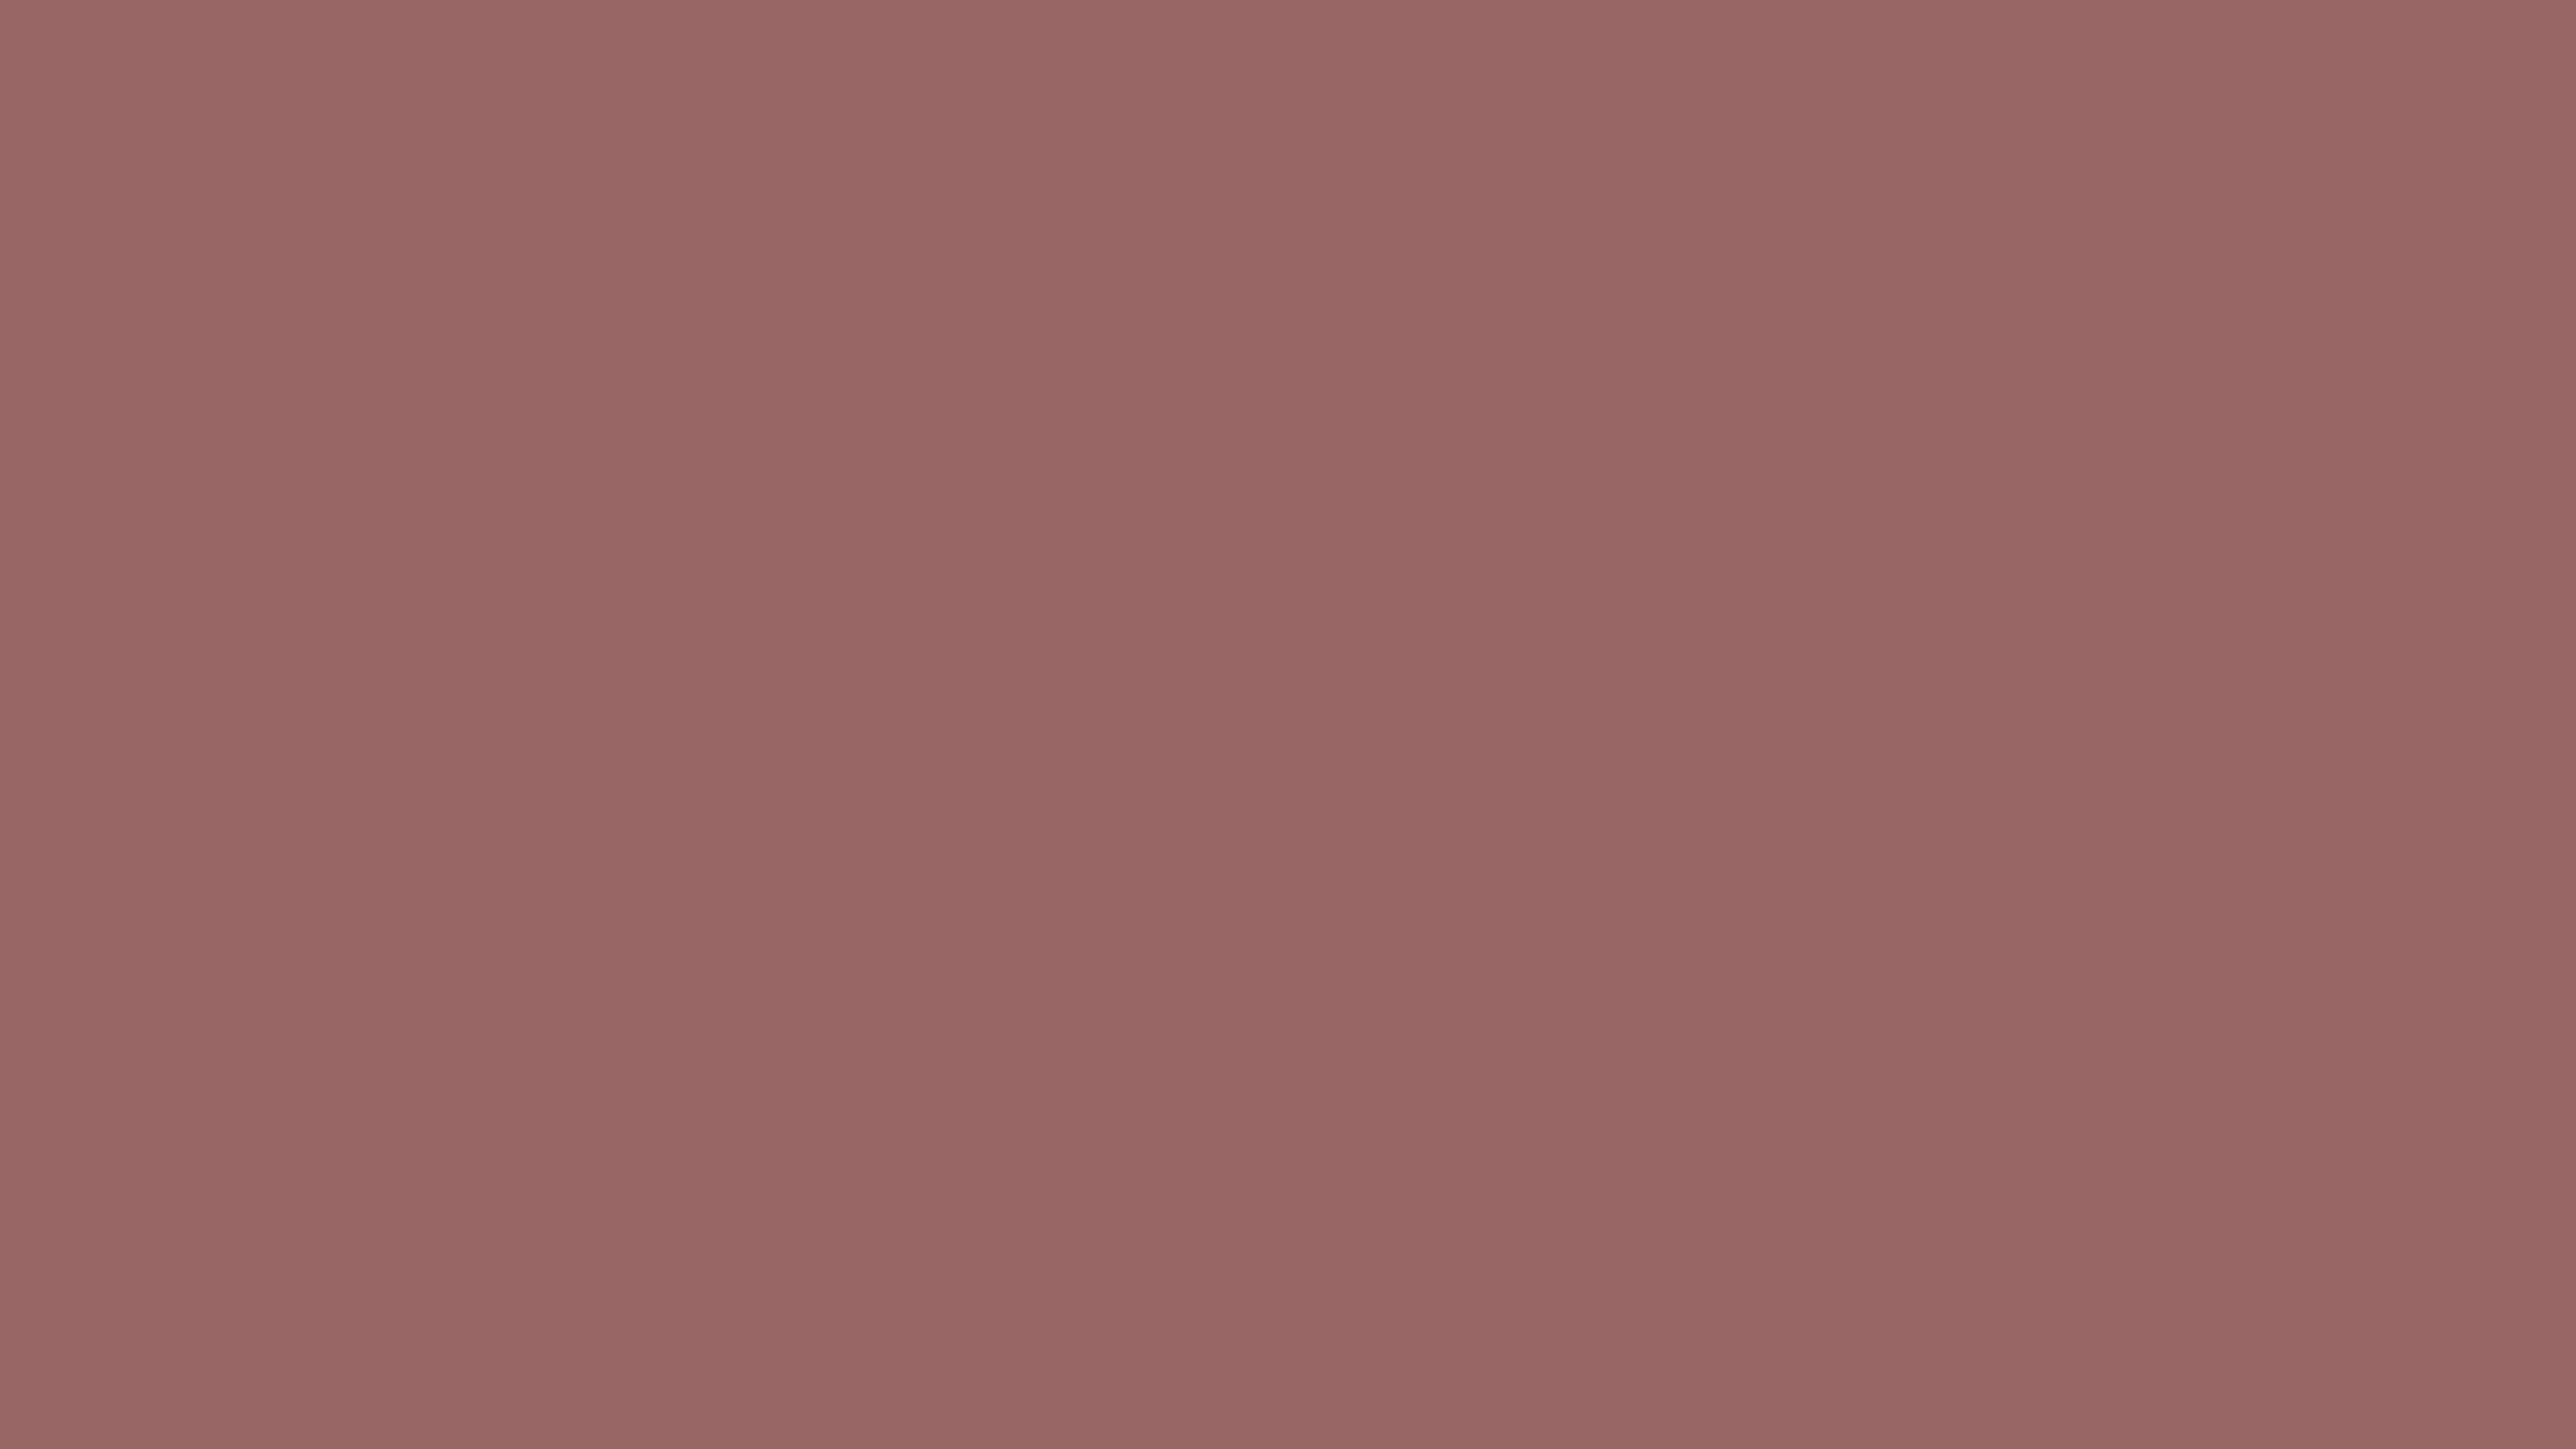 4096x2304 Copper Rose Solid Color Background